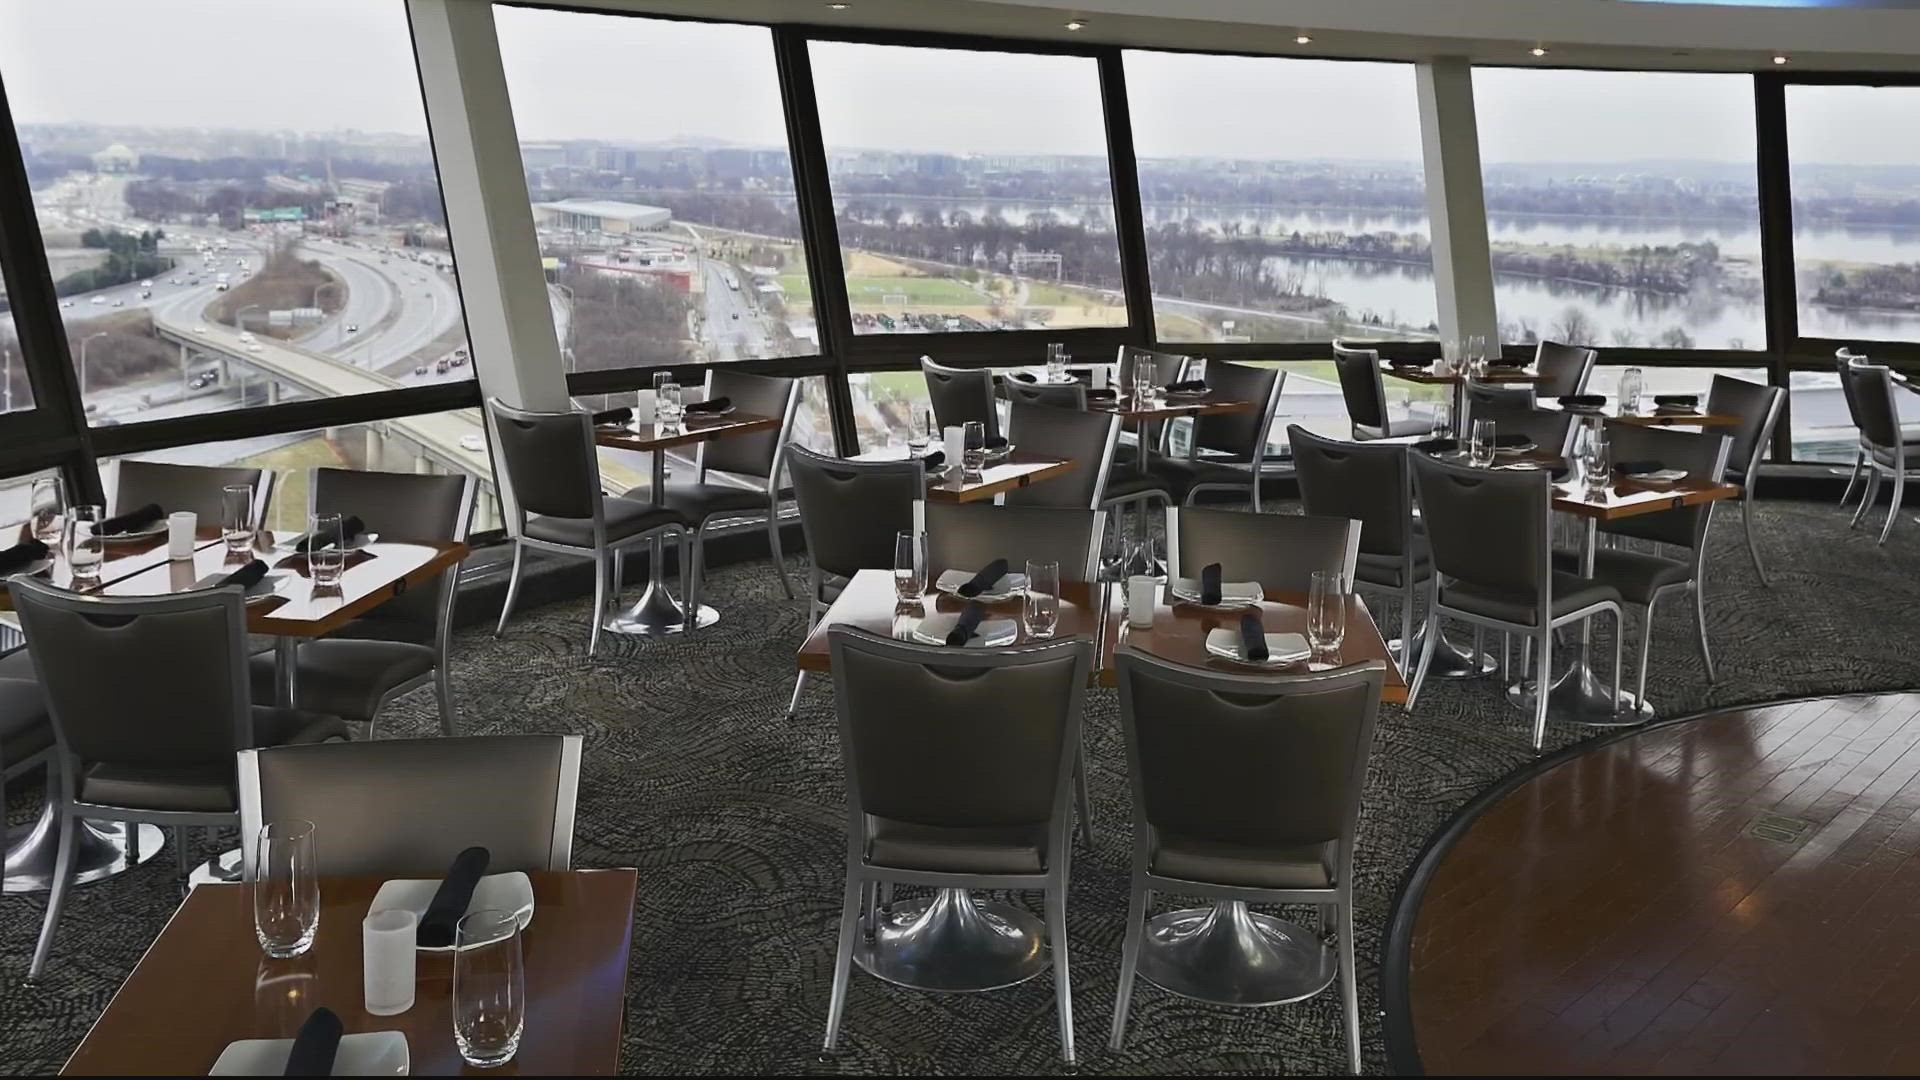 Skydome, a unique rotating rooftop restaurant in the D.C. area, is reopening after a three-year hiatus.